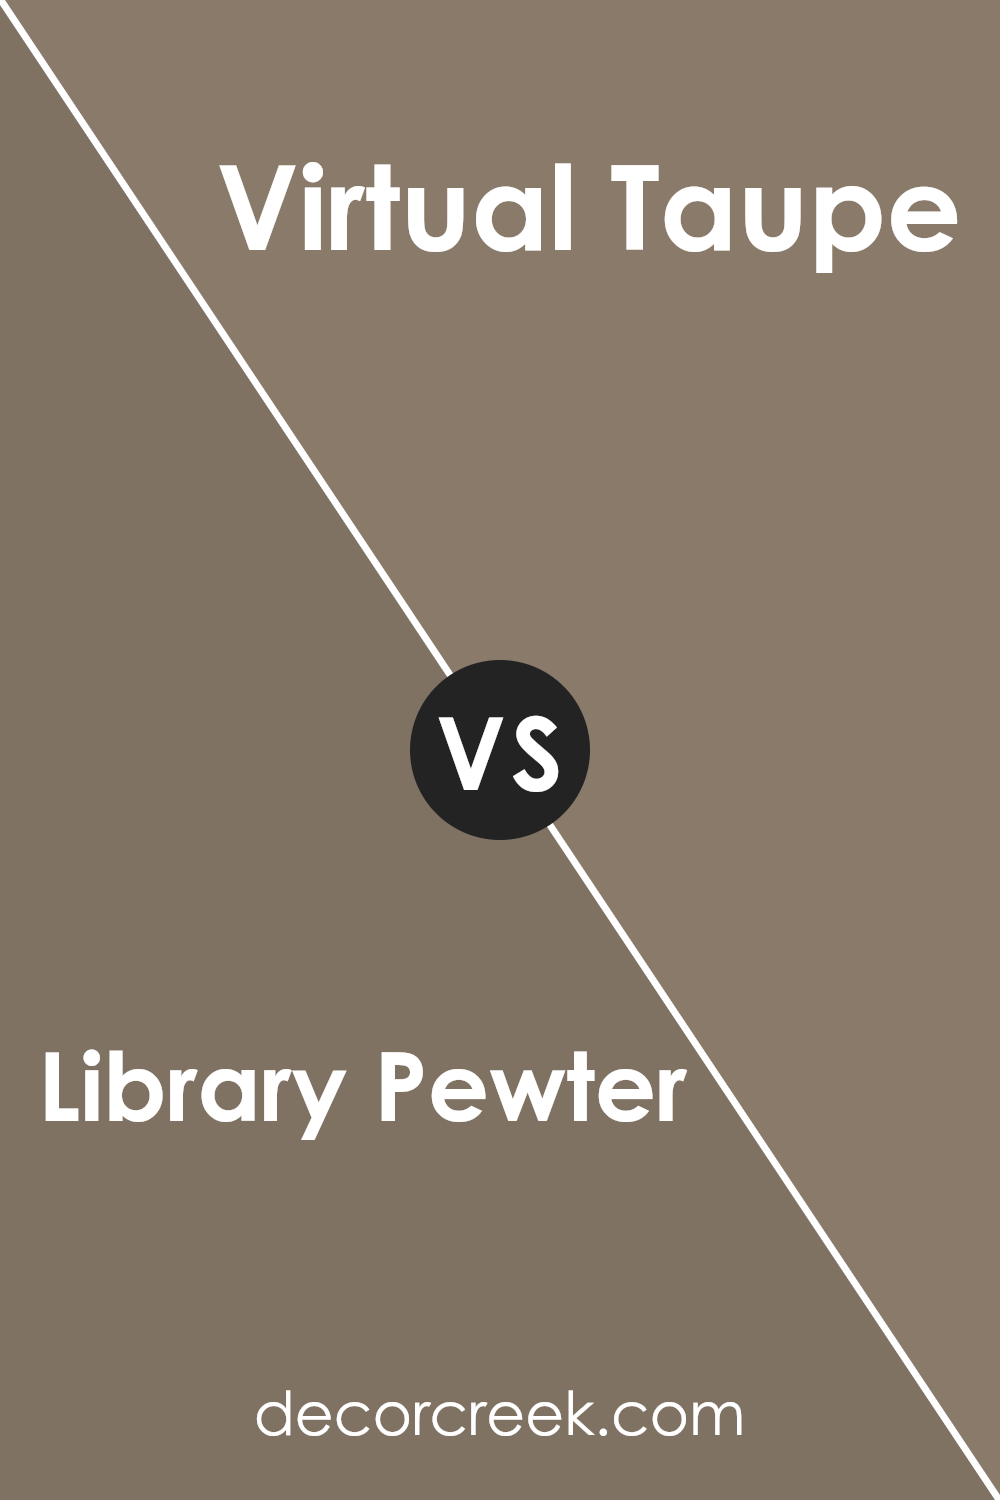 library_pewter_sw_0038_vs_virtual_taupe_sw_7039